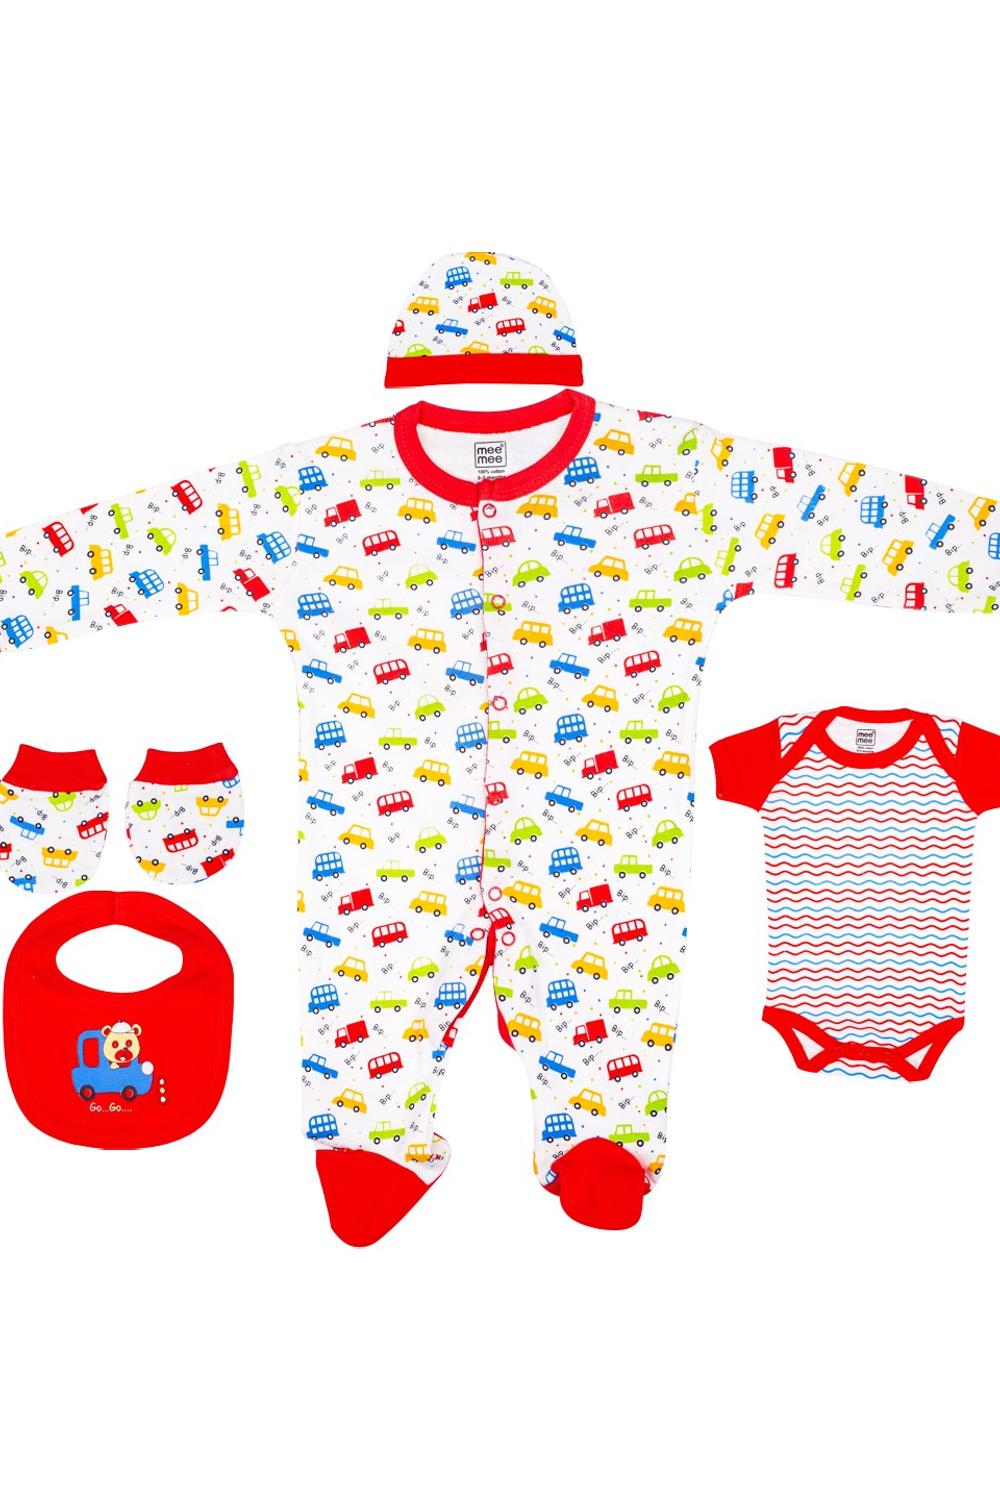 Mee Mee Clothing Gift Set Pack of 5 - Red